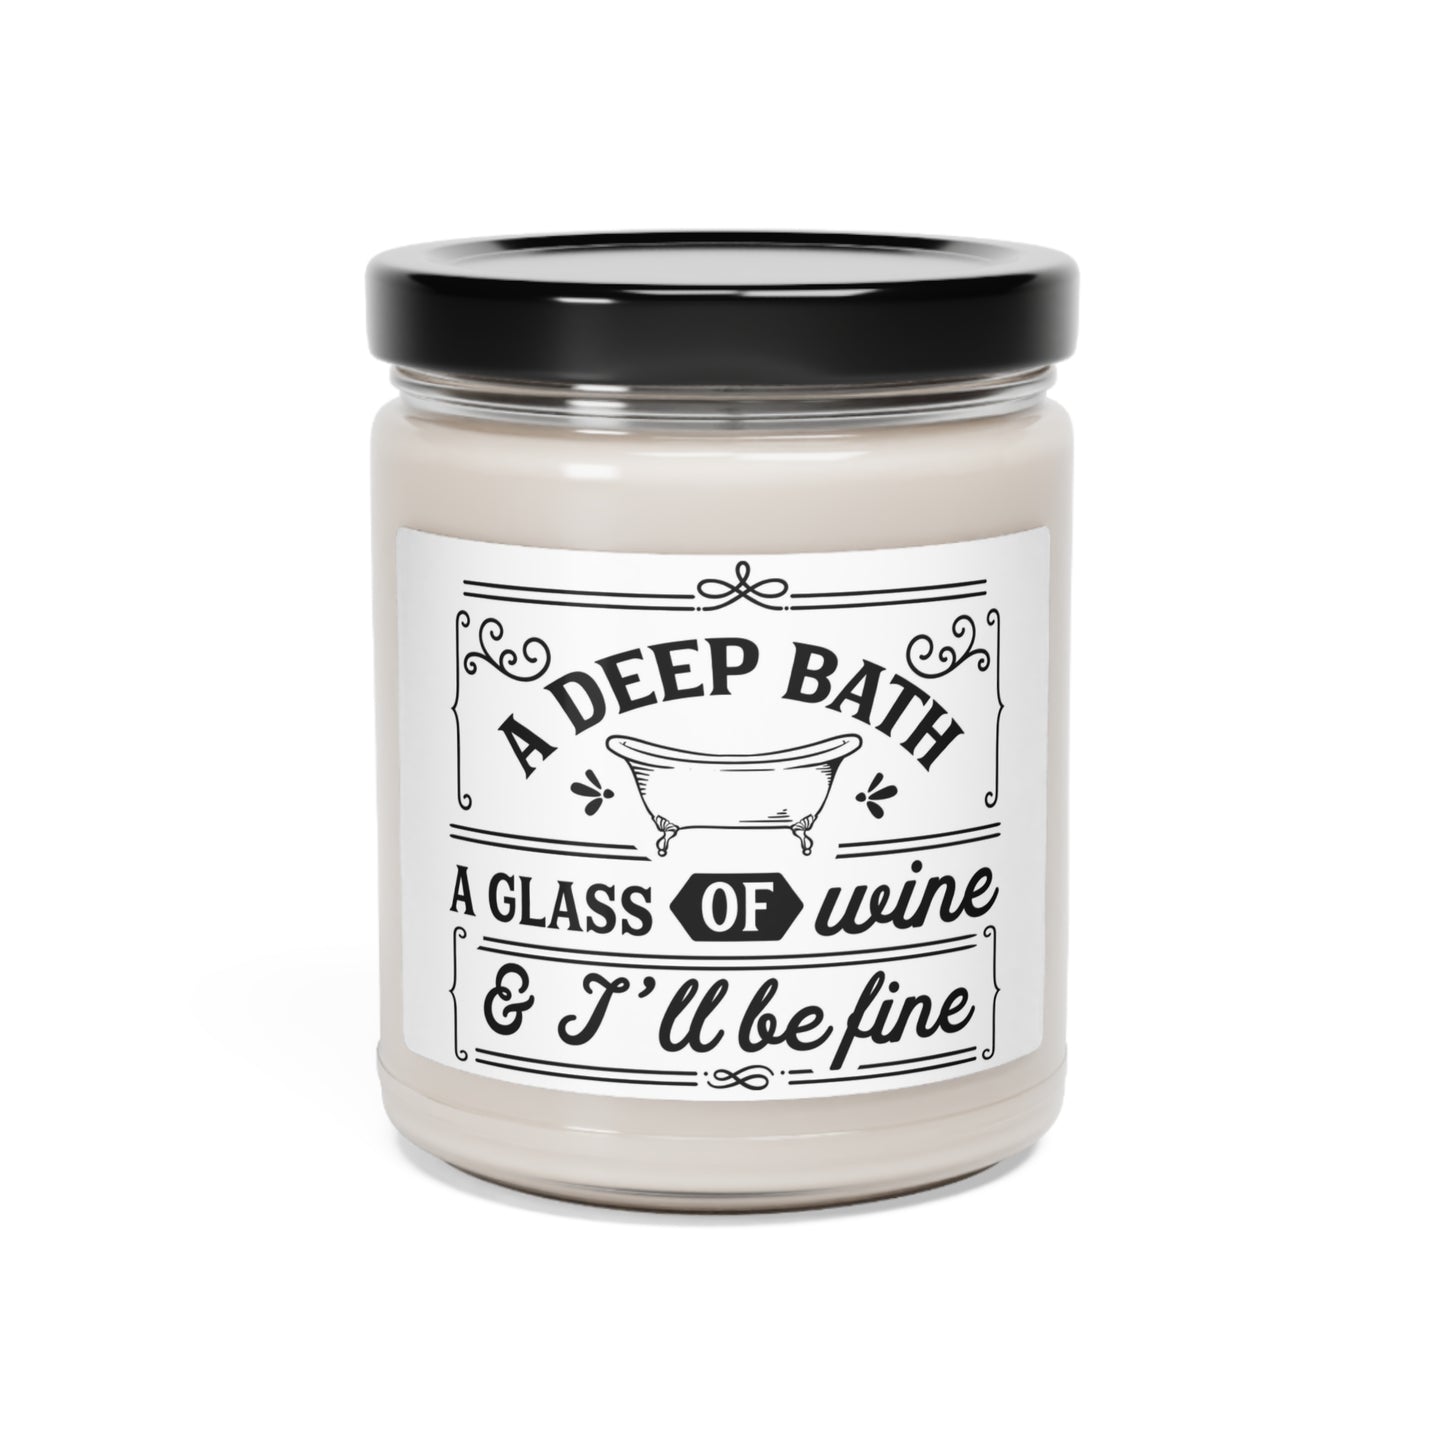 A deep bath and a glass of wine Scented Soy Candle, 9oz